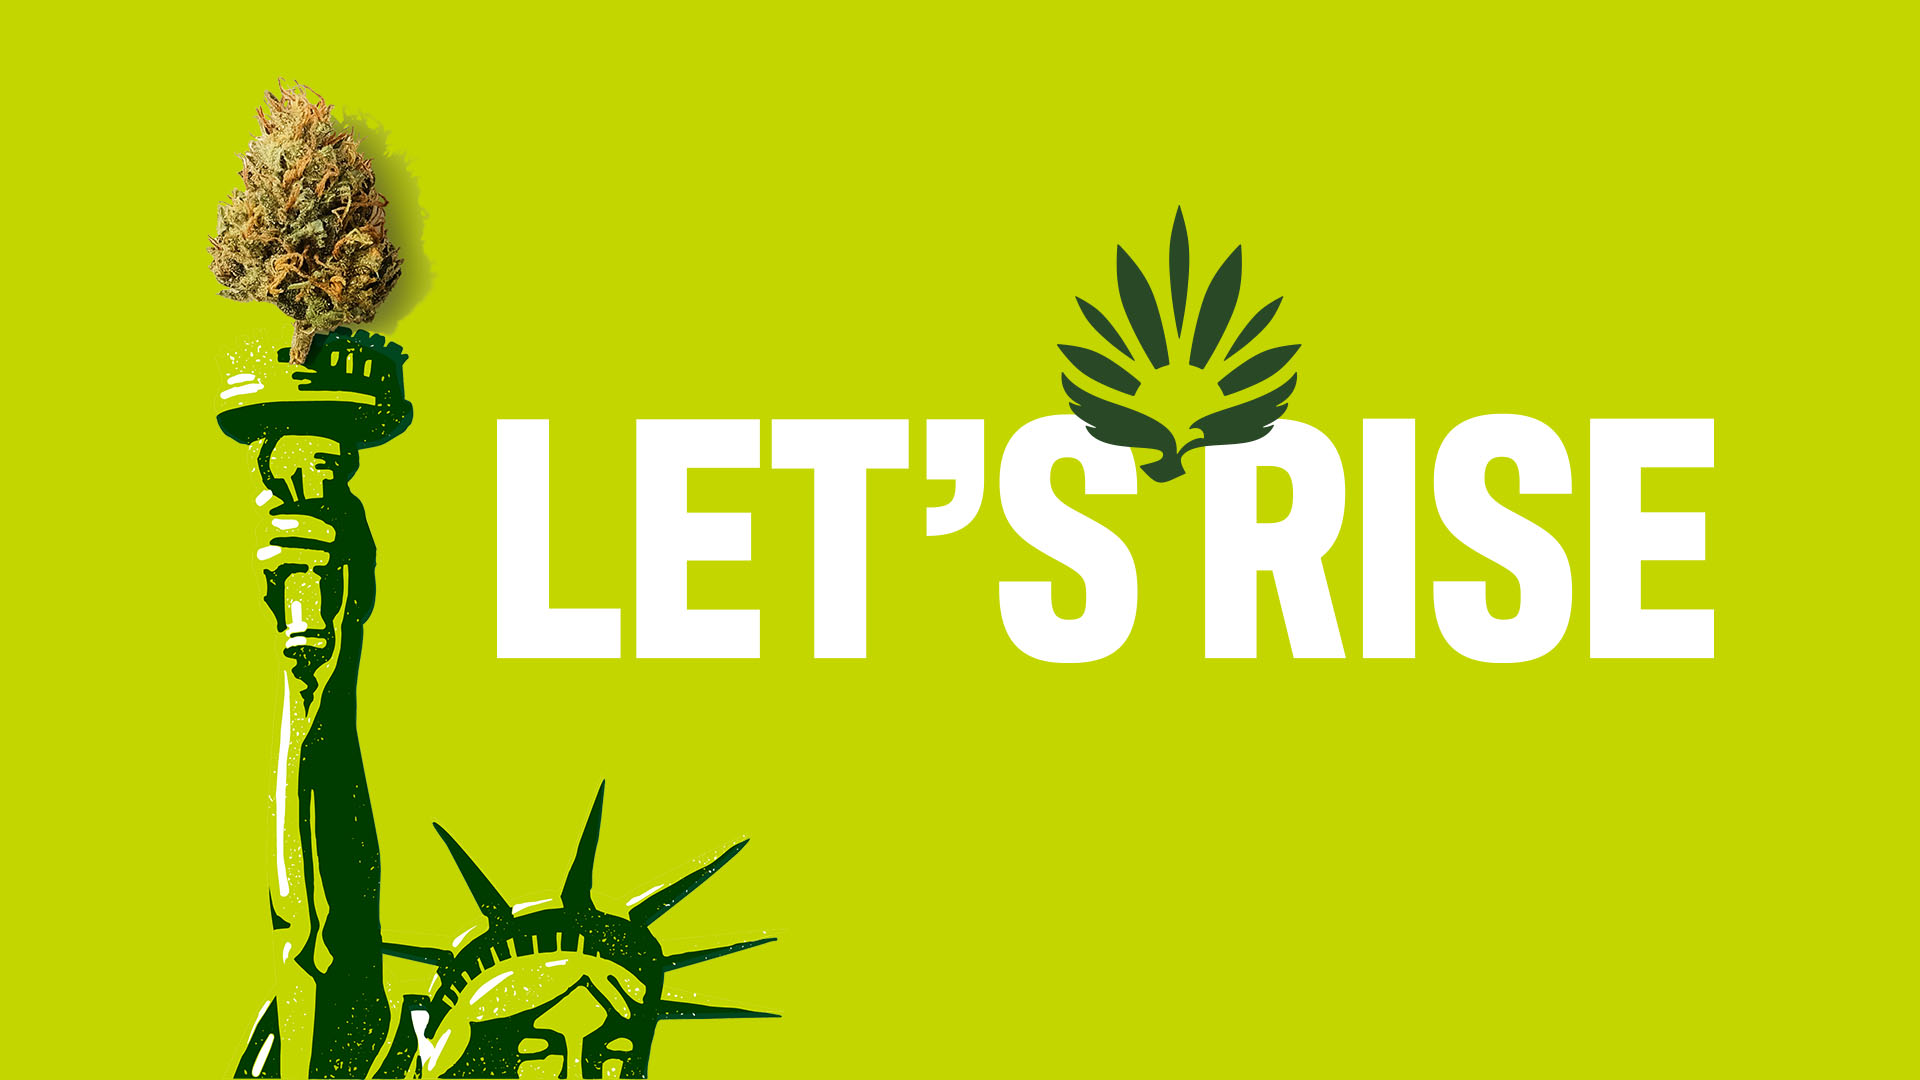 one of the RISE Lady Liberty illustrations next to the Let's Rise slogan